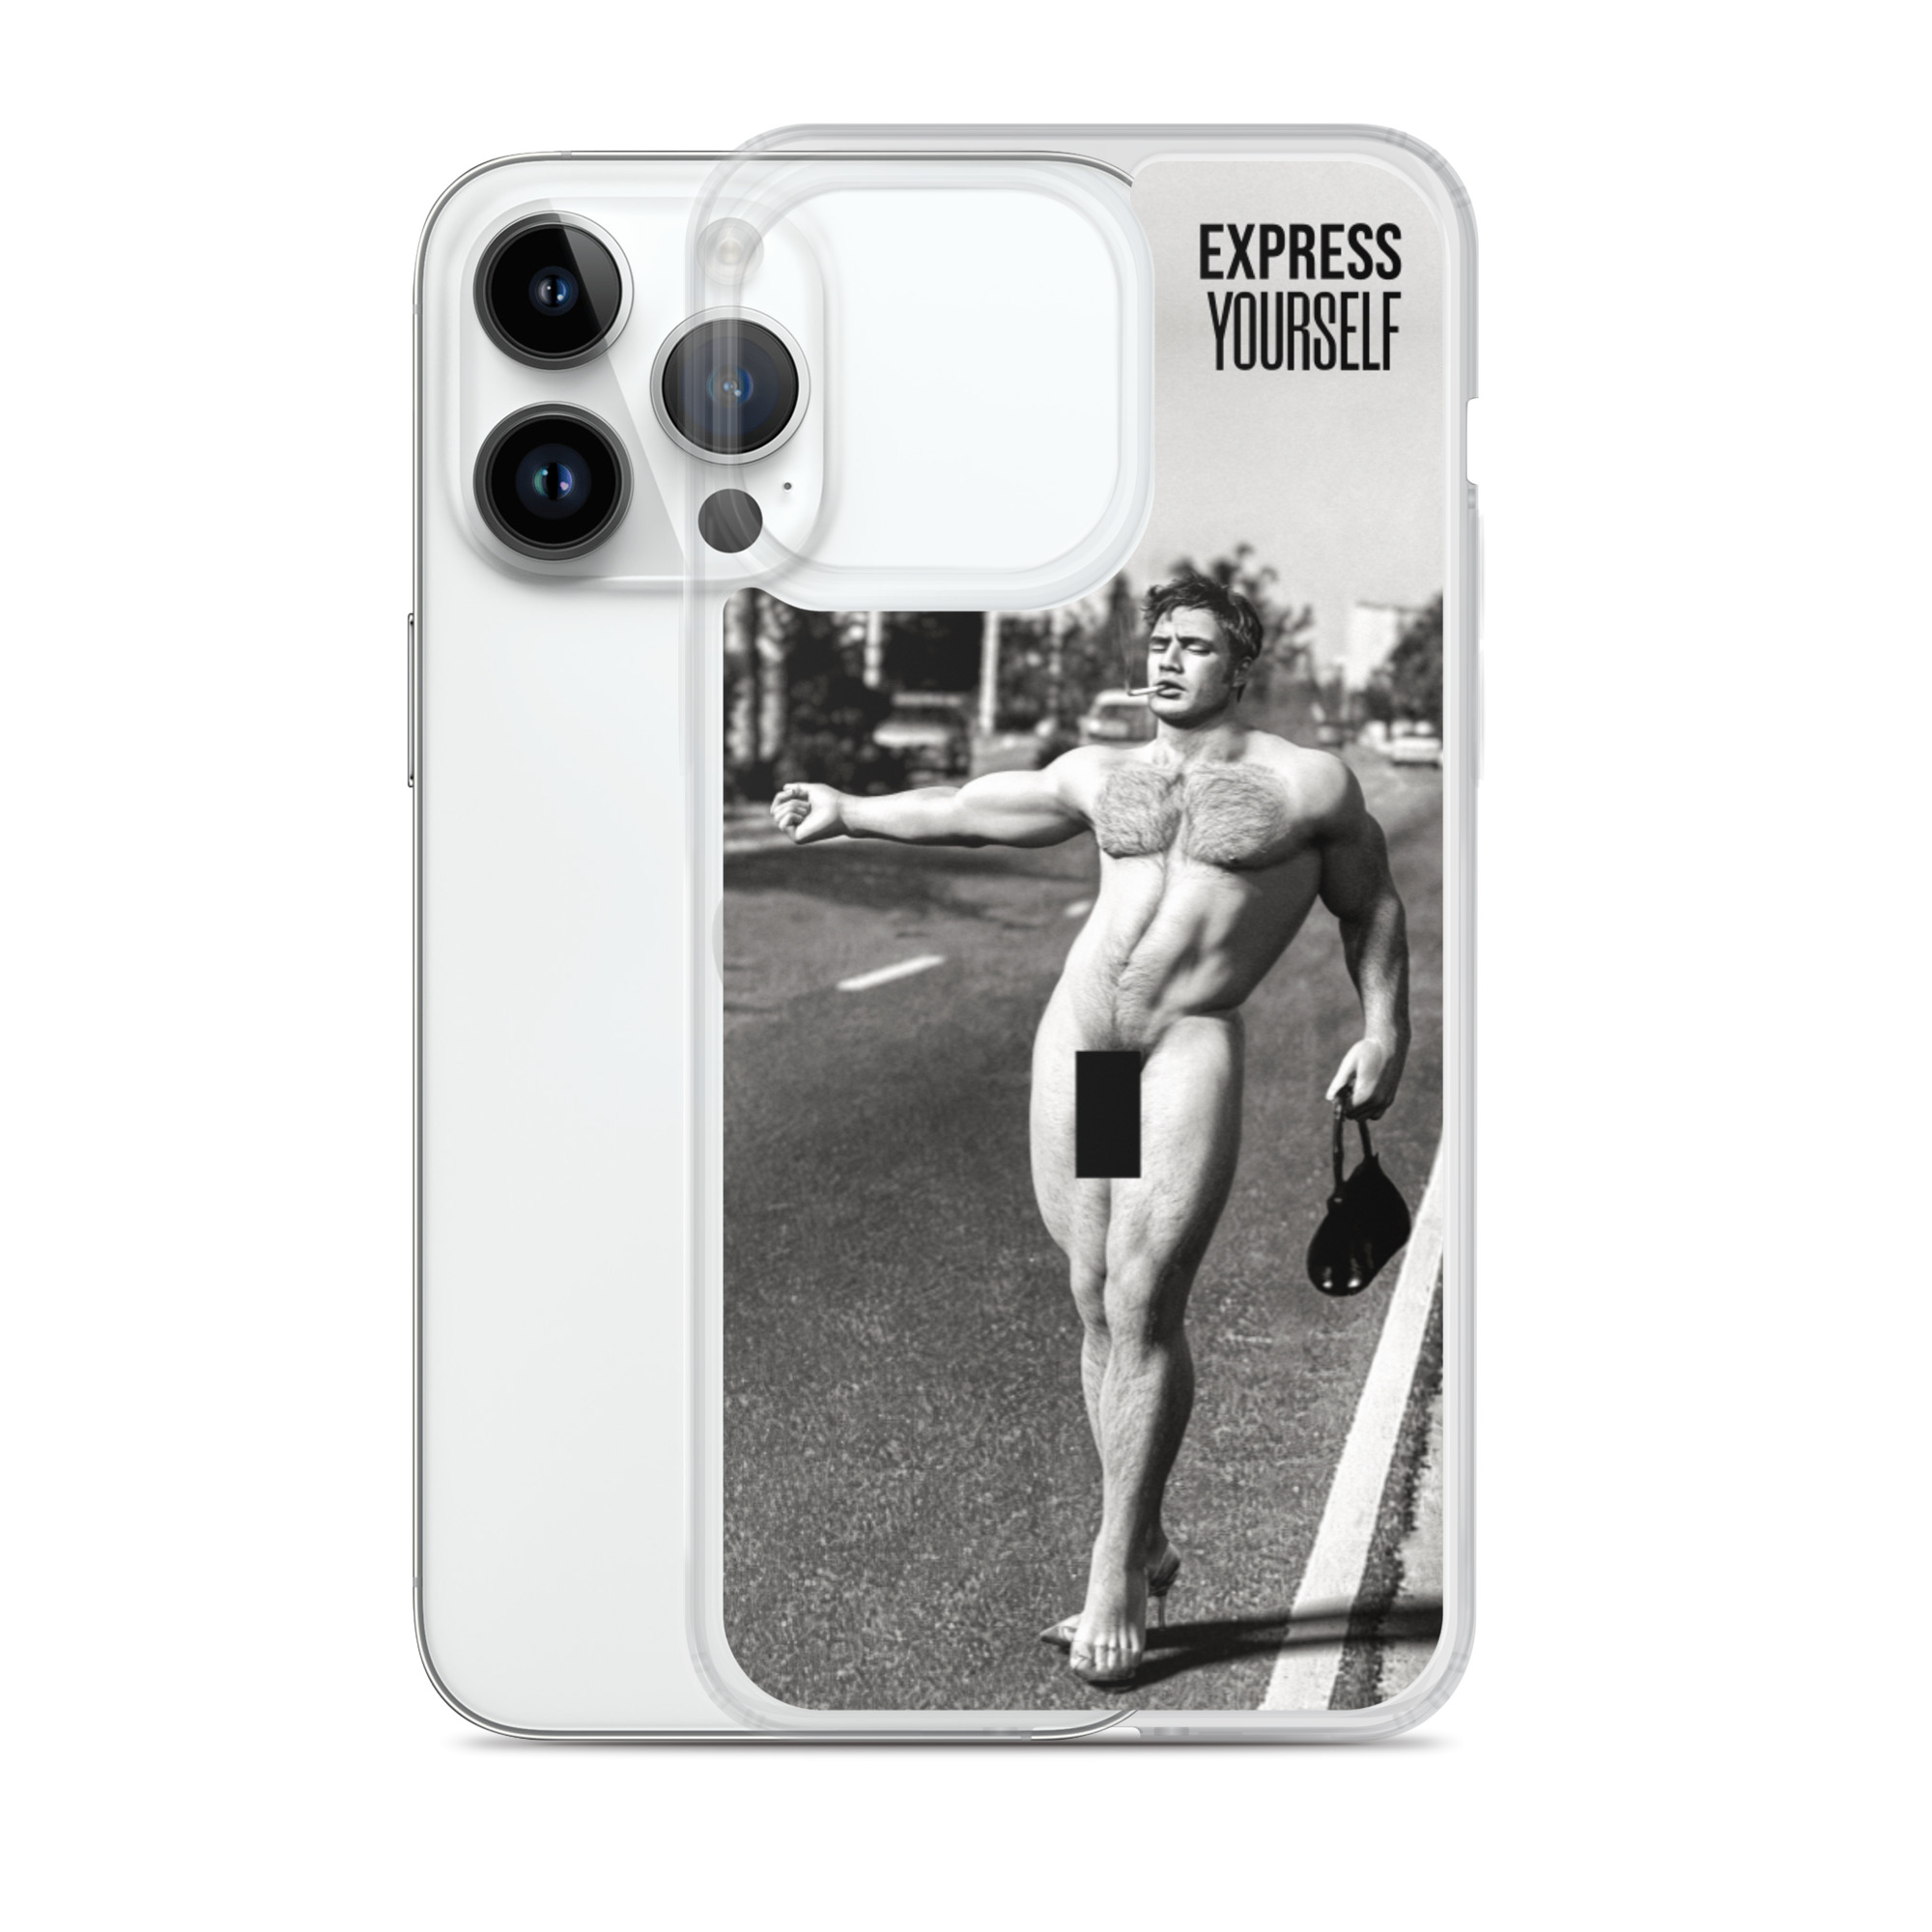 Featured image for “Express Yourself - iPhone Case”